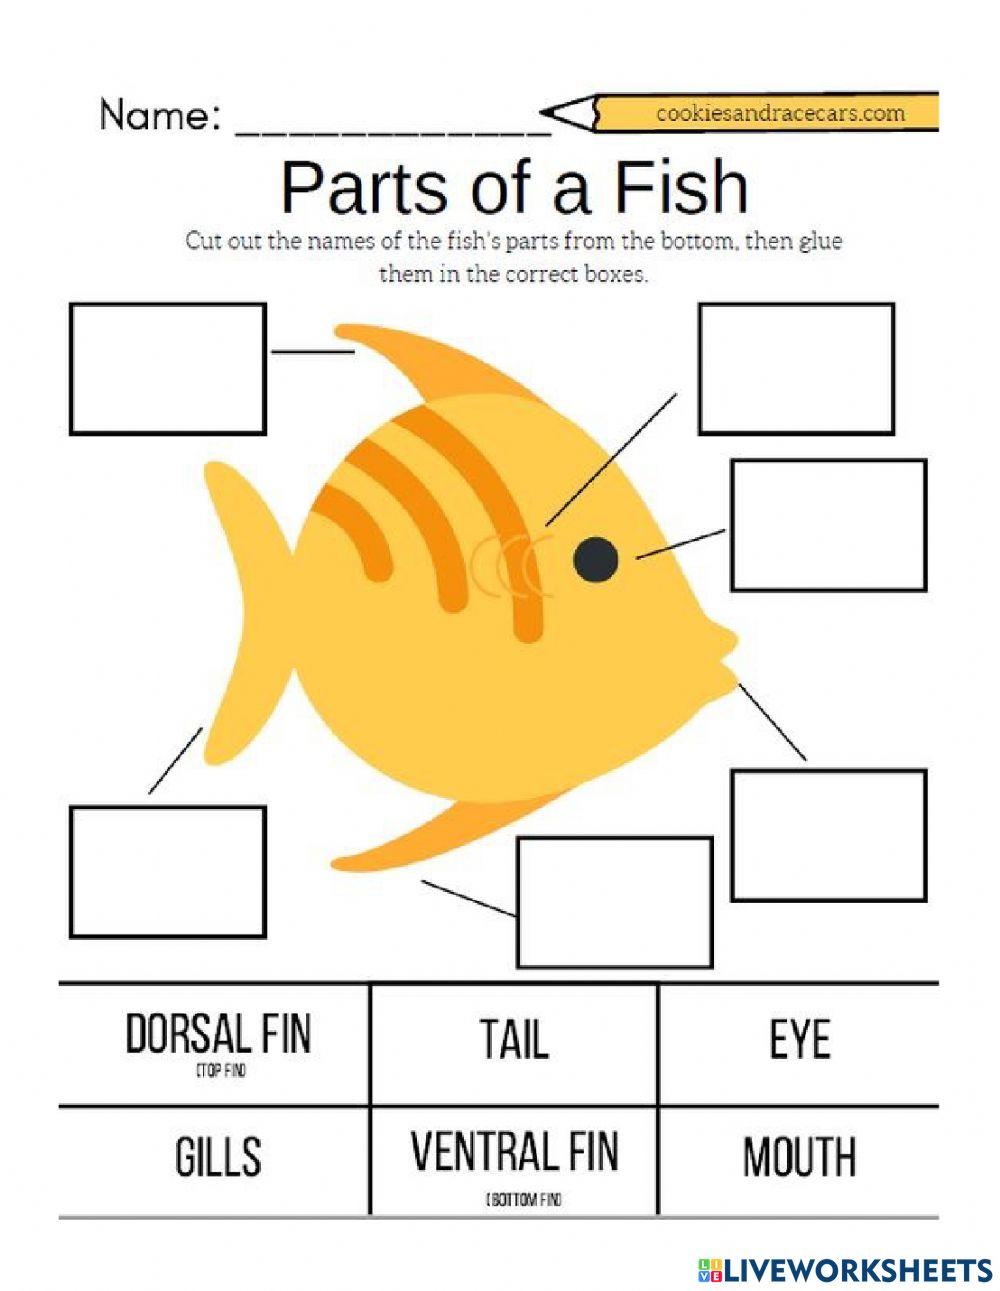 Parts of the Fish